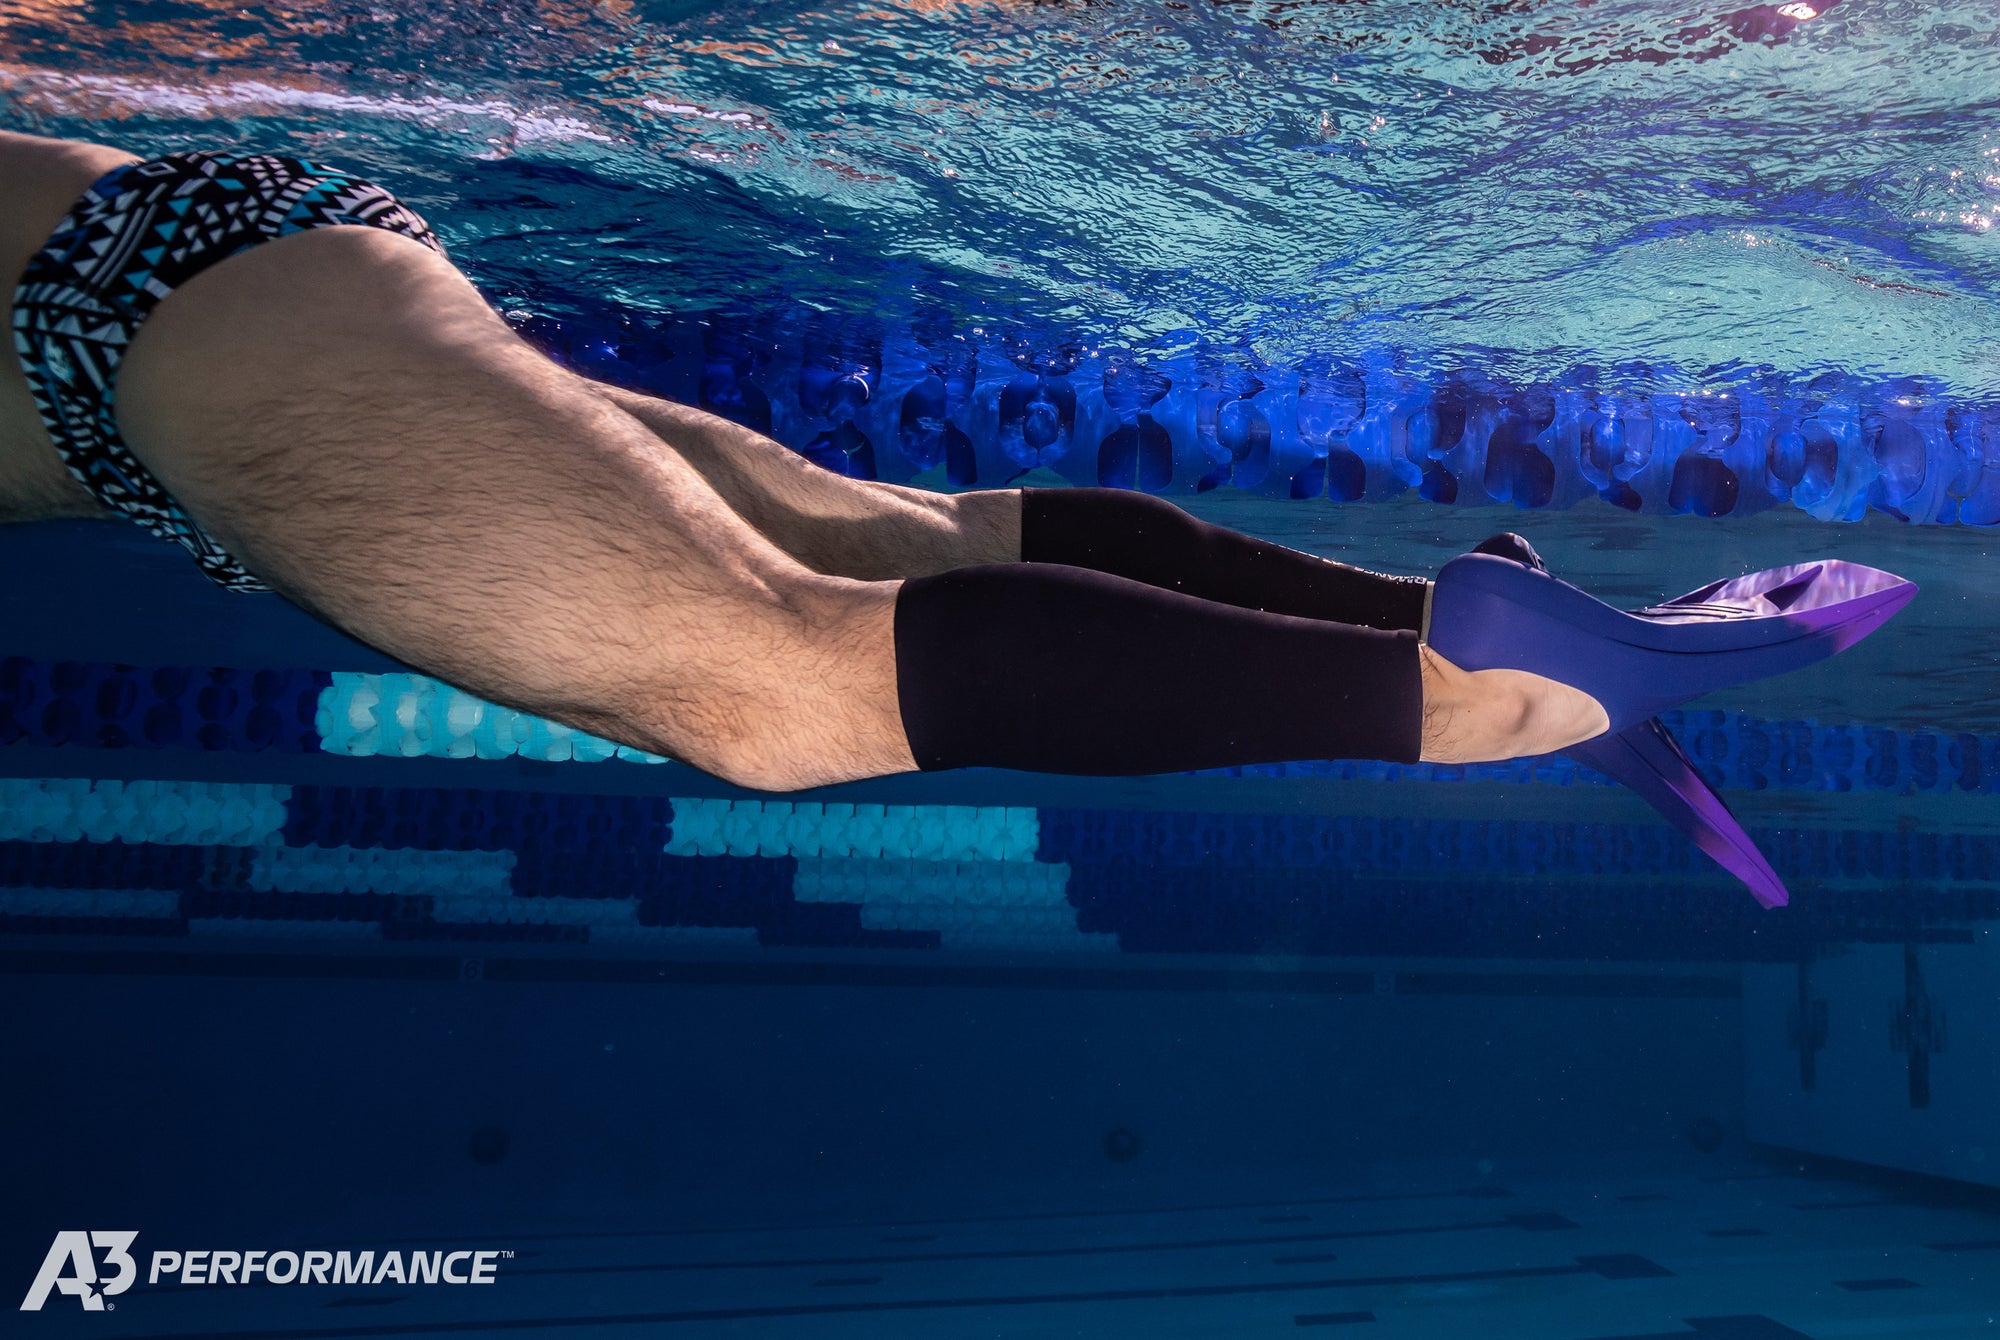 A3 Performance Swift Kick Fins - Swim Like A. Fish - Why it's impossible to kick fast without great swimming fins